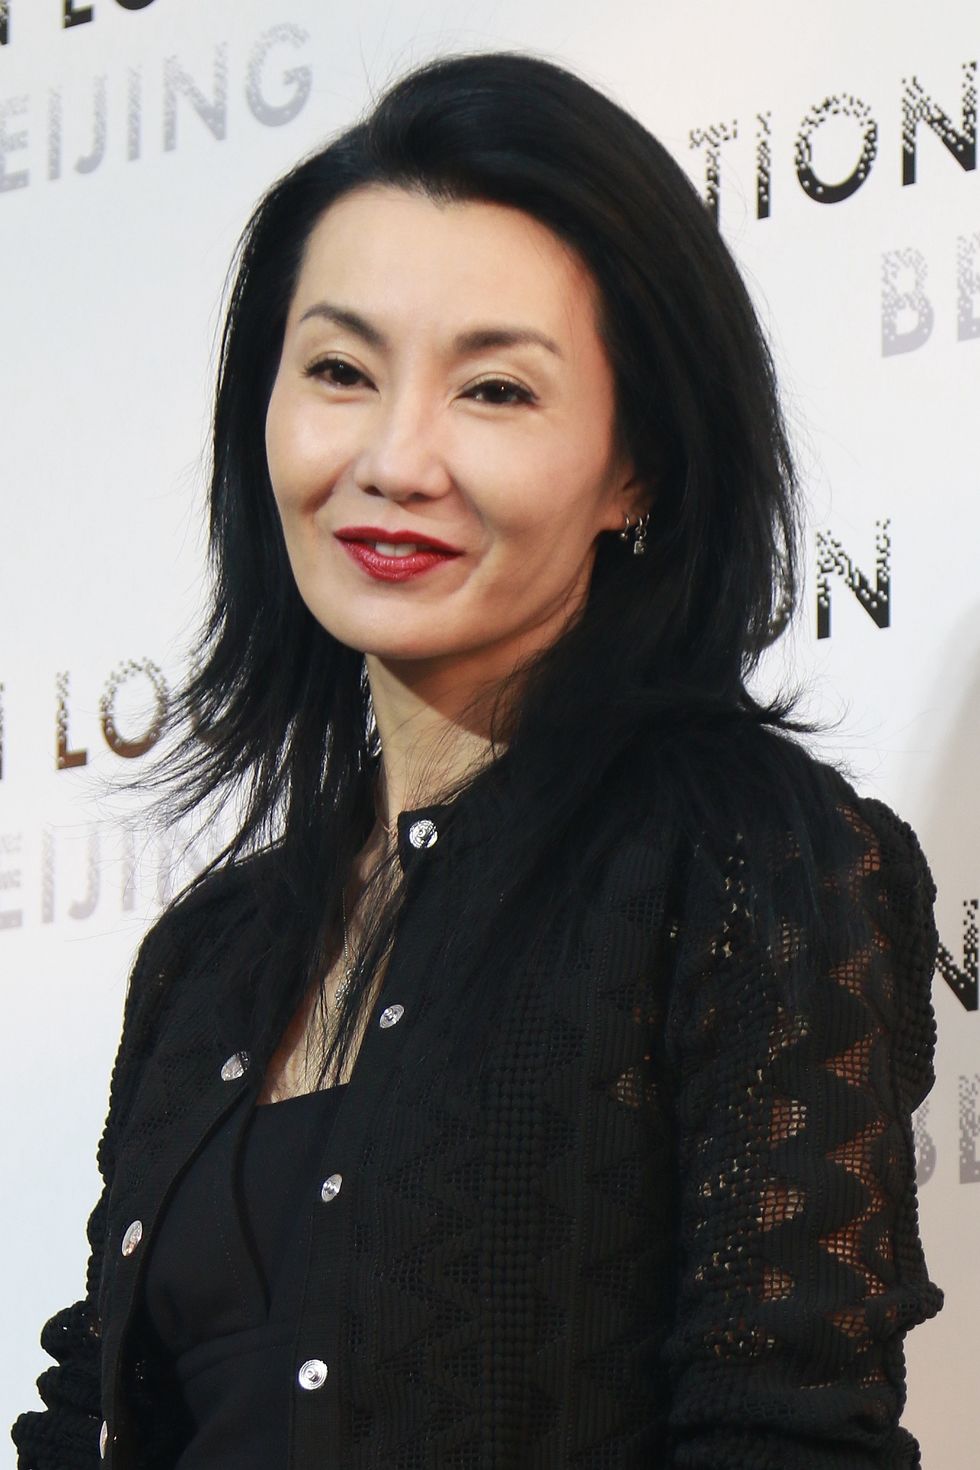 maggie cheung attends fondation louis vuitton's "beyond the walls" exhibition in beijing